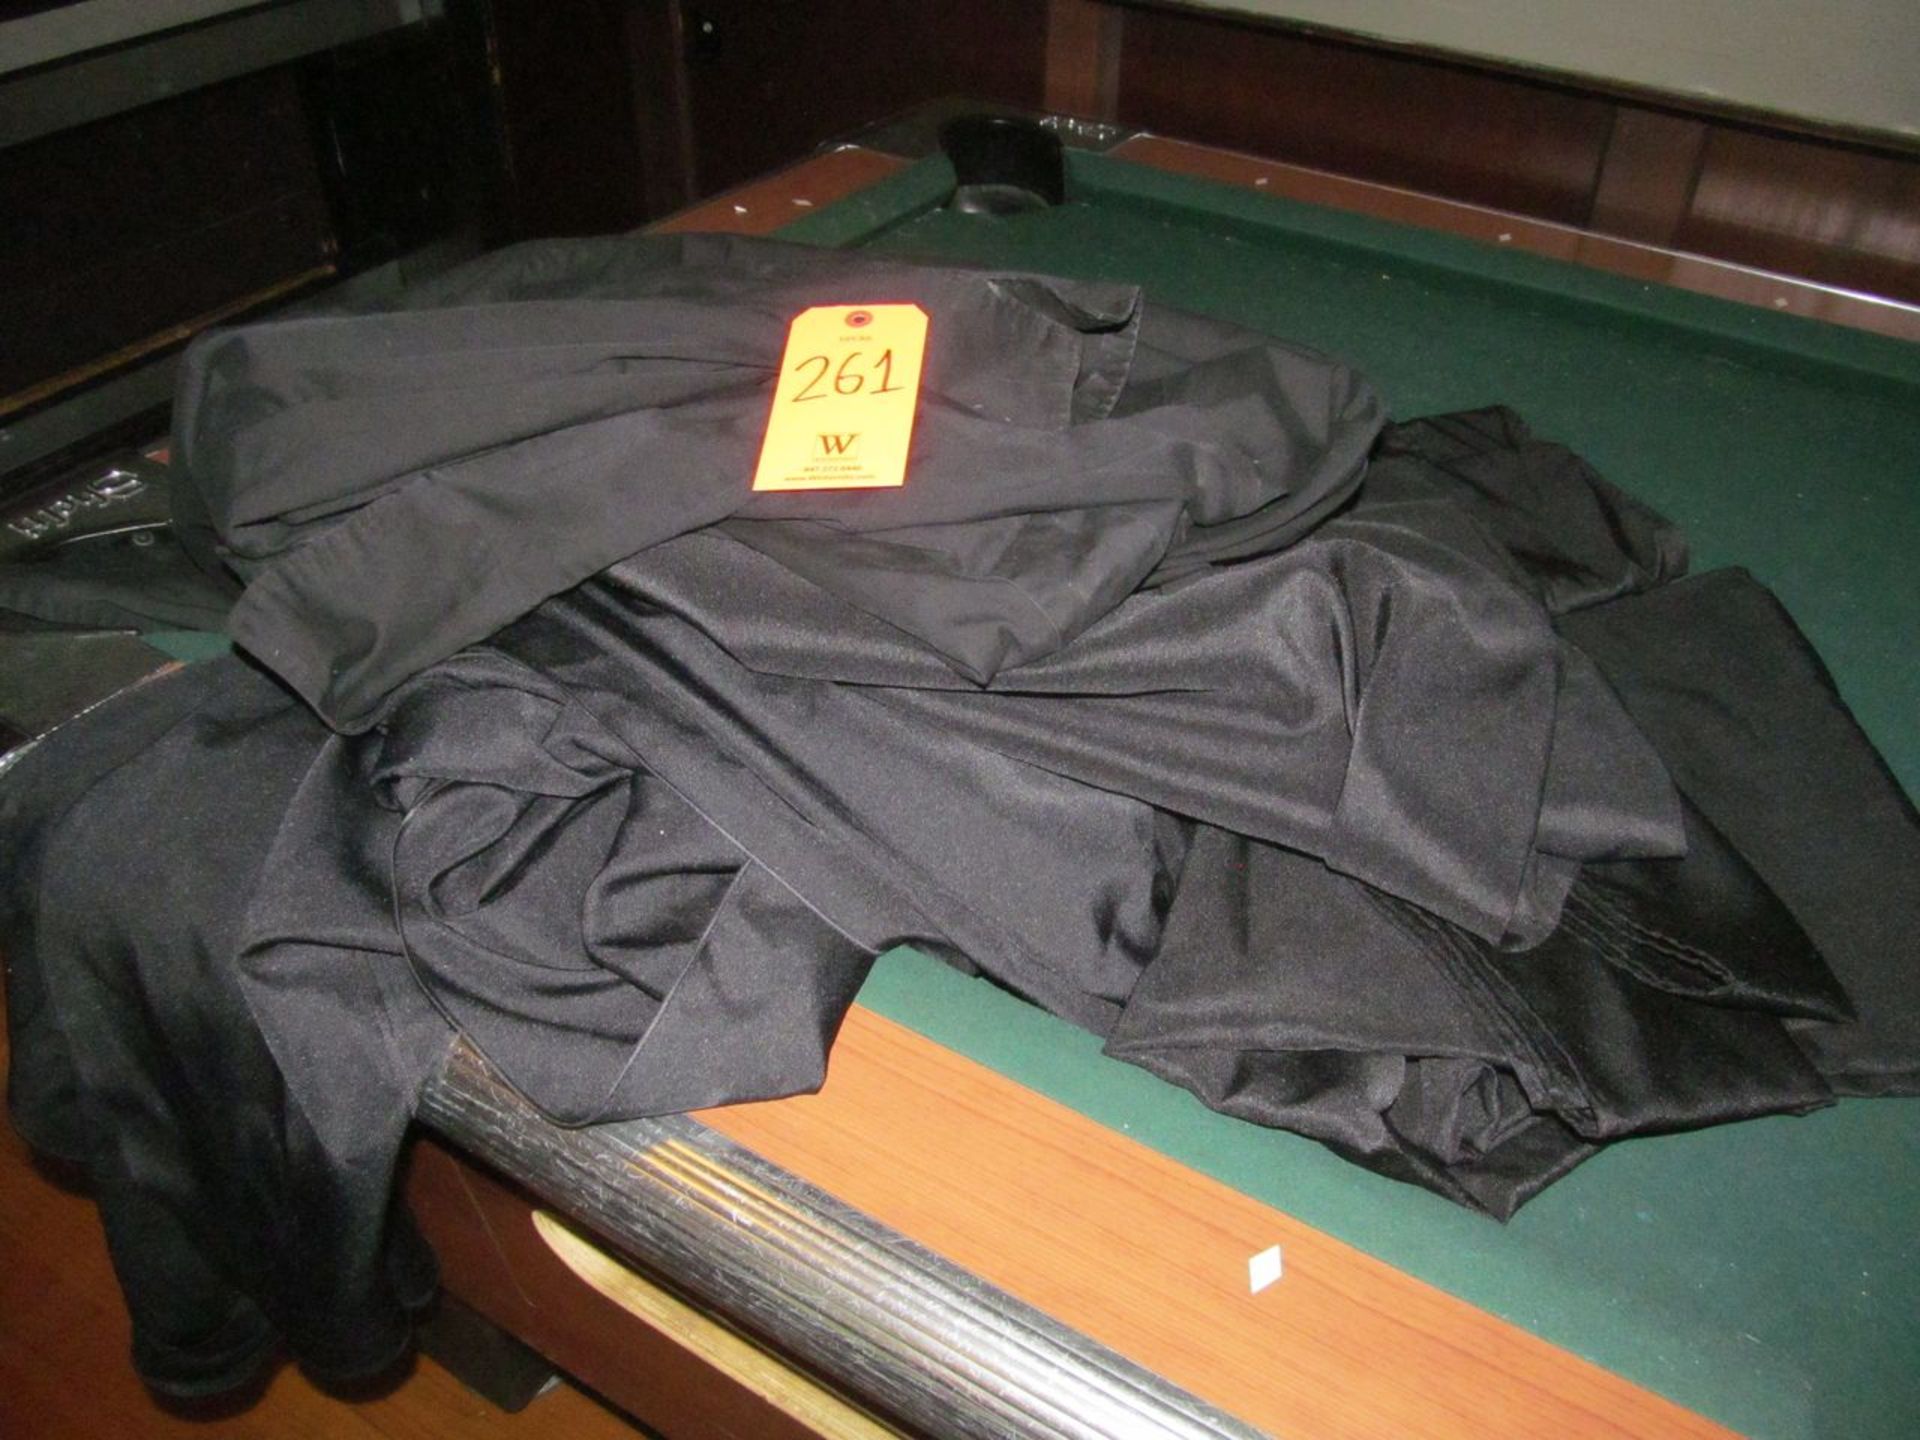 Assorted Table Cloths (Bowling Room)